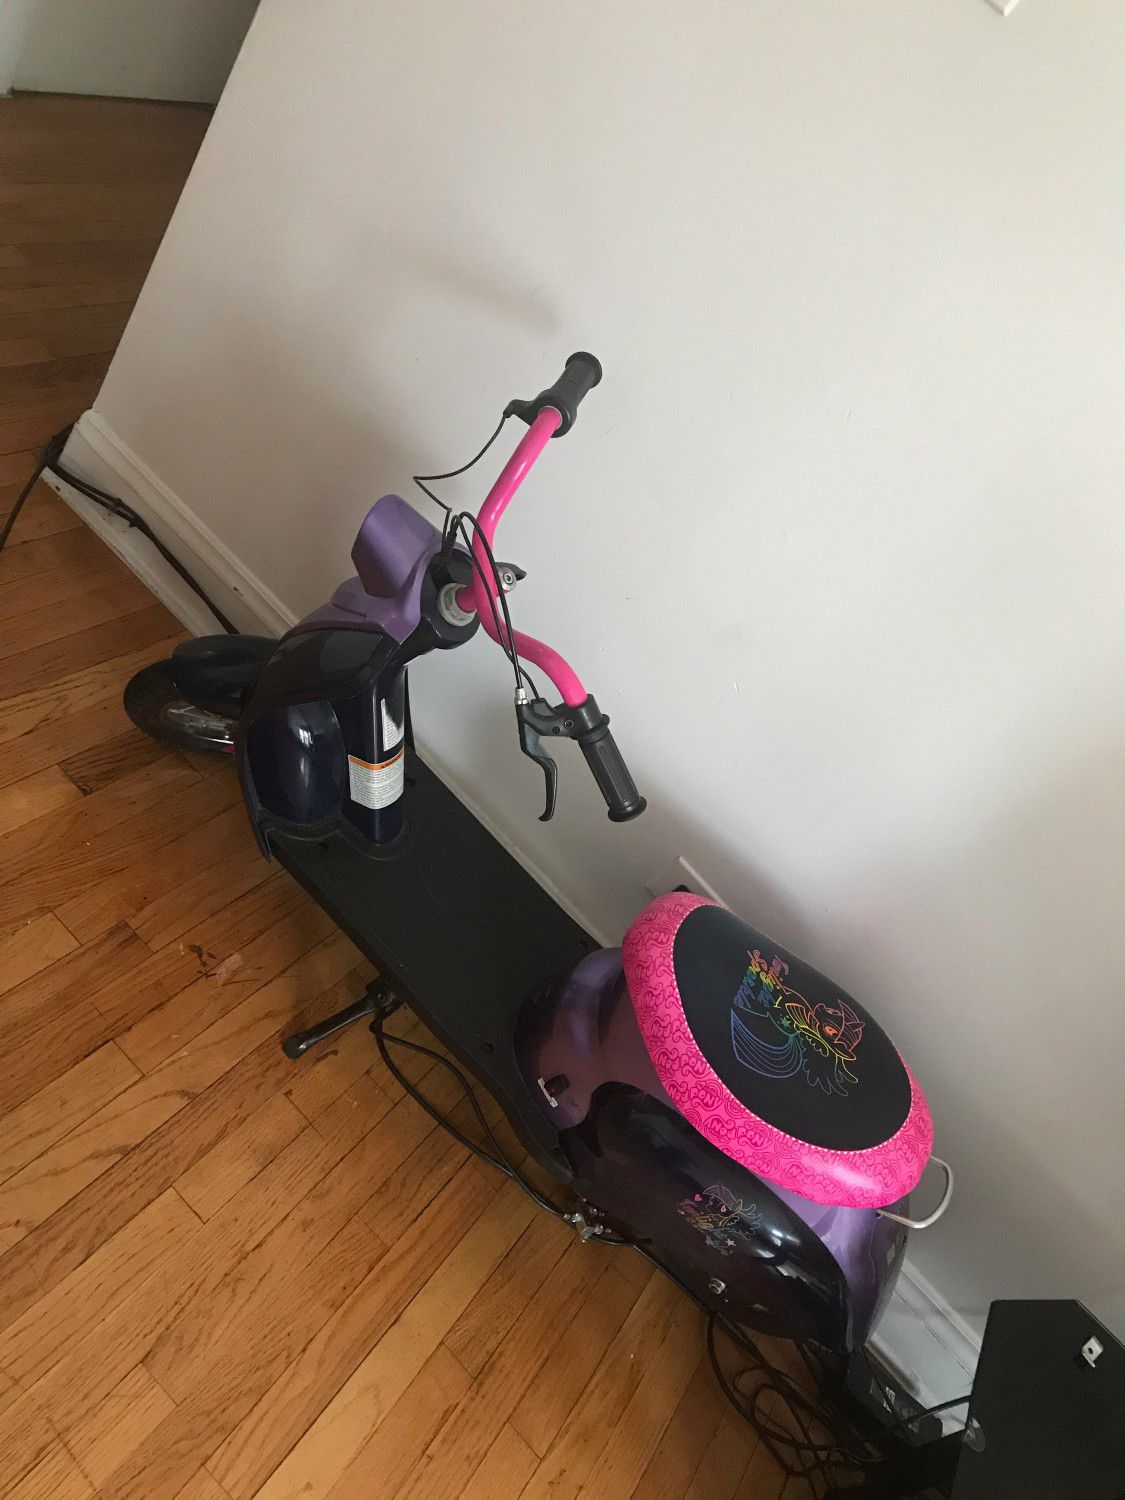 Scooter $125 obo